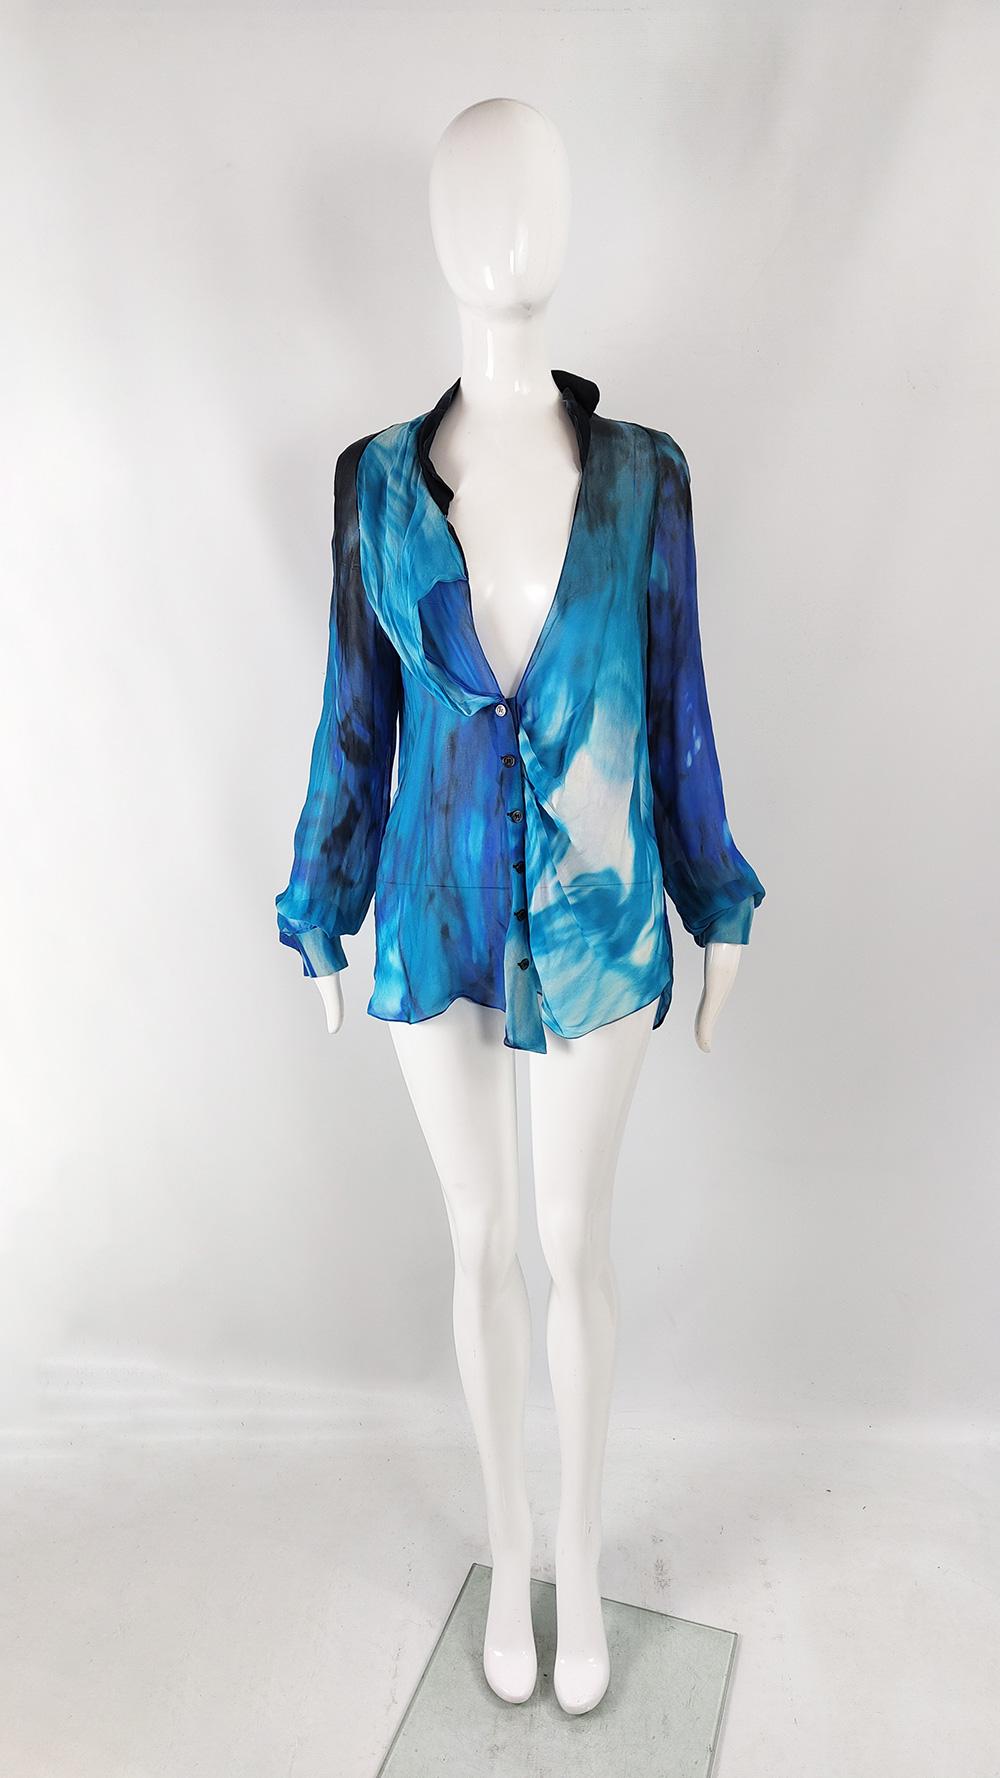 A stunning vintage womens blouse from the 2000s by luxury Parisian fashion house, Emanuel Ungaro. In a sheer blue, black and white abstract printed pure silk chiffon that gives incredible movement, and conjures up images of the sea. It has a loose,